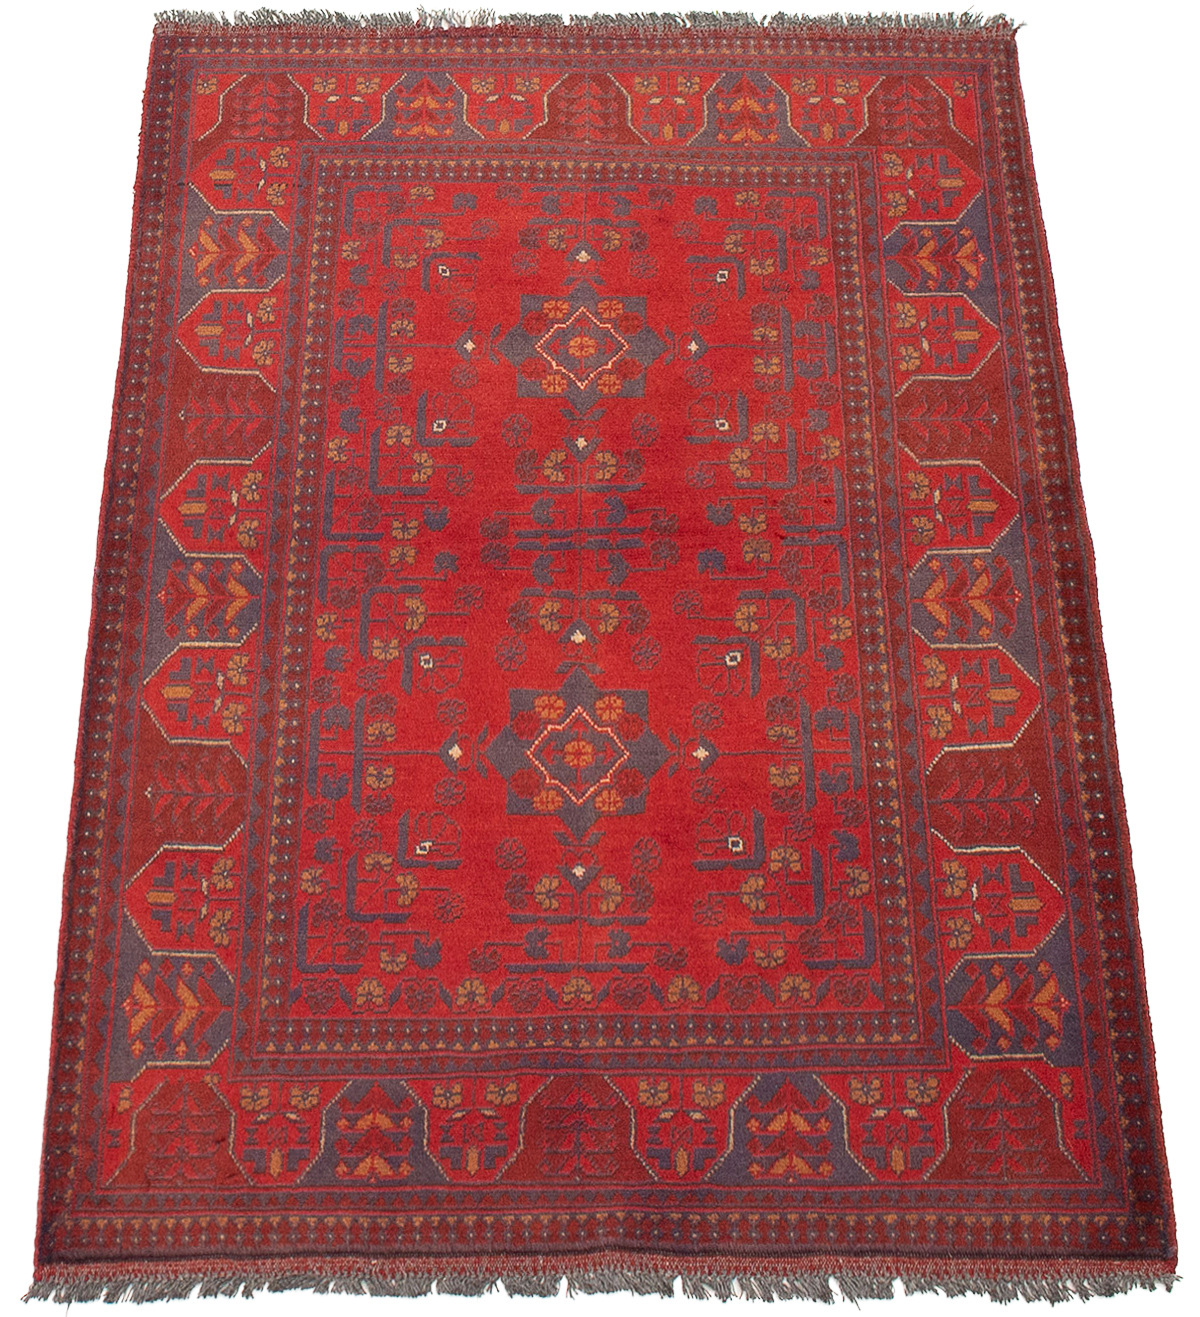 eCarpet Gallery Area Rug for Living Room 328693 Hand-Knotted Wool Rug Finest Khal Mohammadi Bordered Red Rug 4'0 x 6'2 Bedroom 